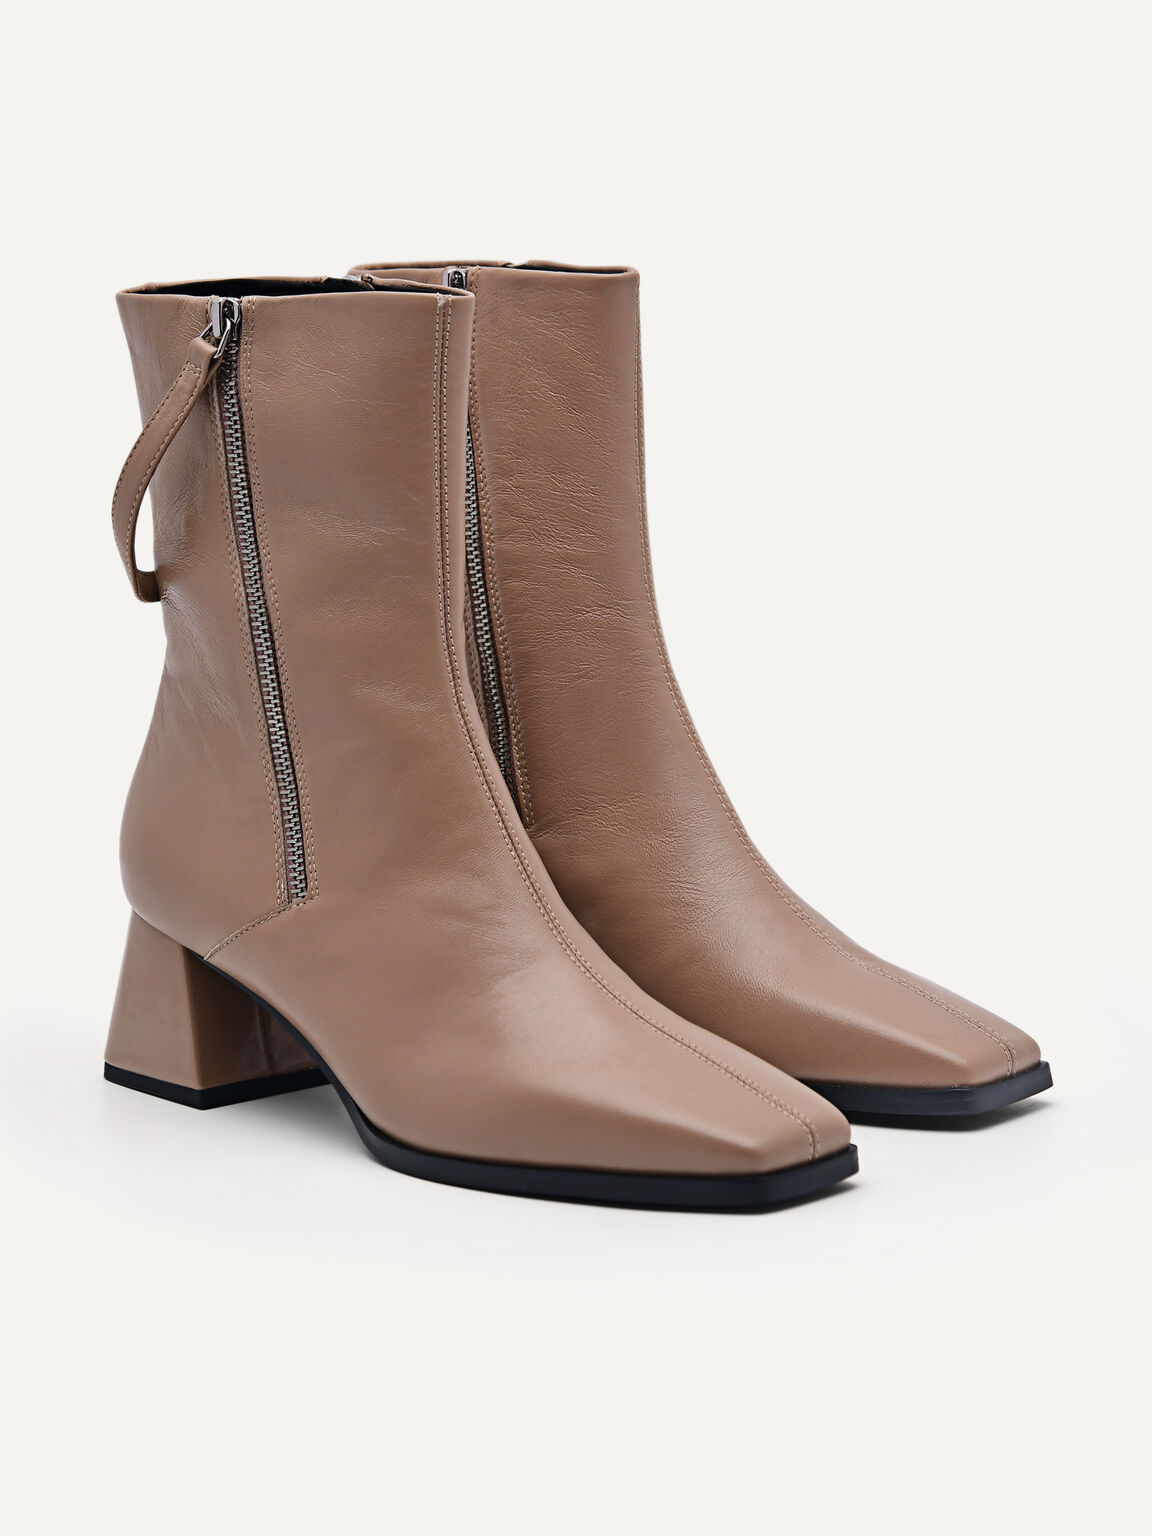 Leather Weimar Ankle Boots, Taupe